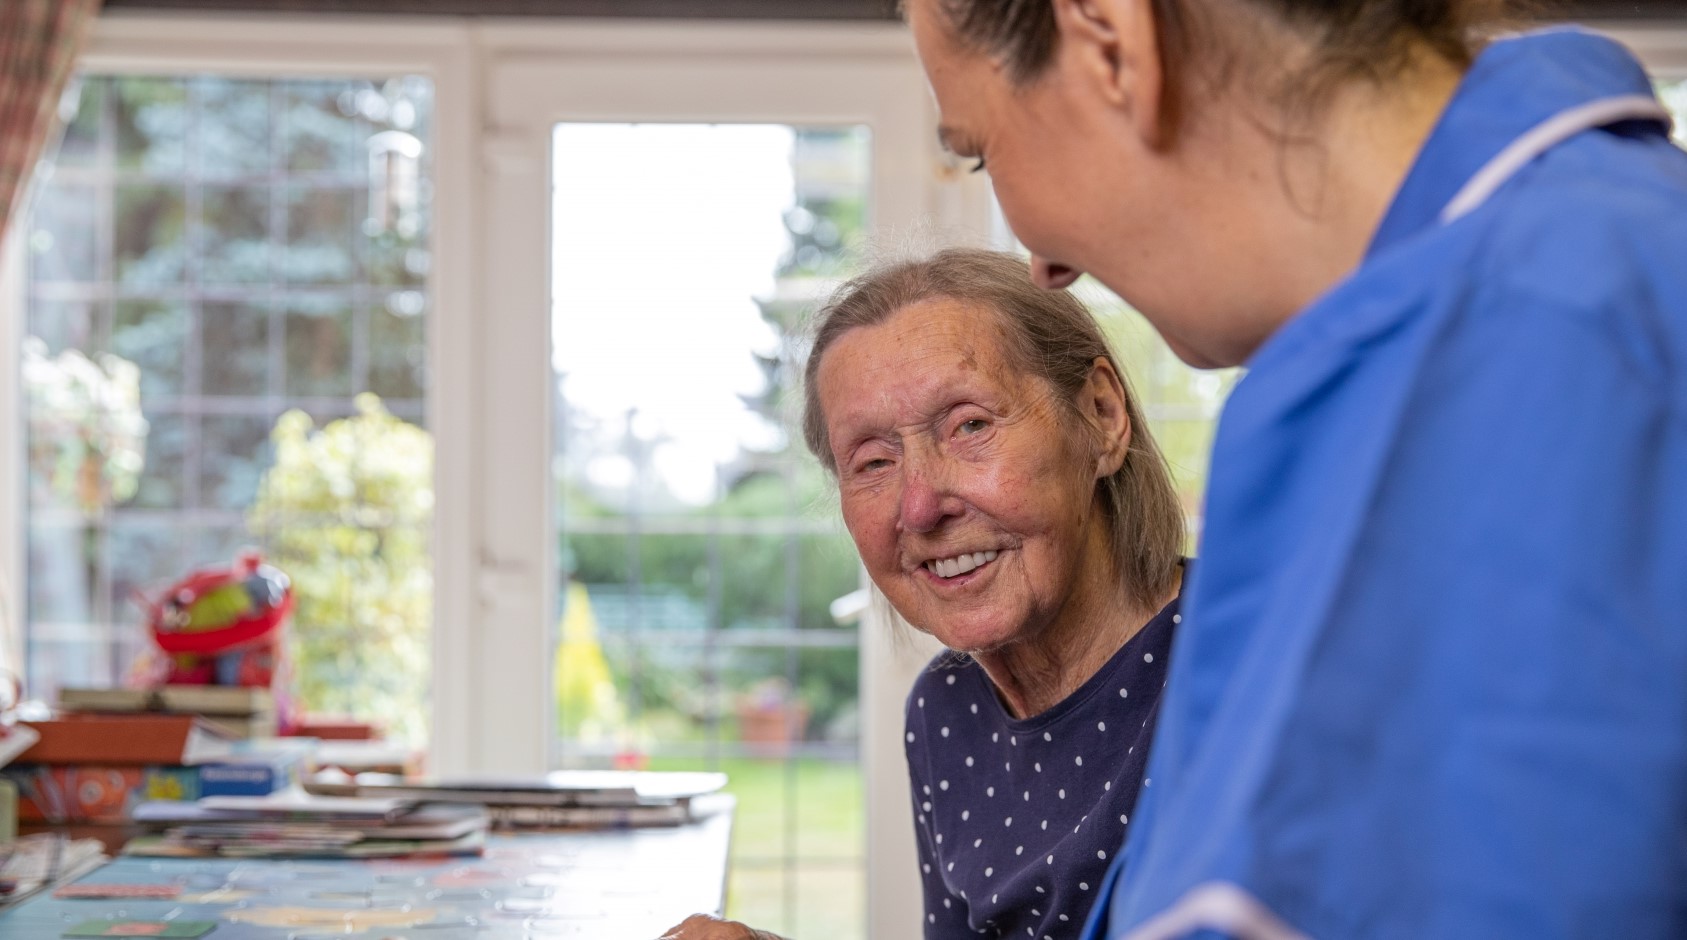 Signature at Wandsworth Common care home, 94 North Side Wandsworth Common,  Wandsworth, London SW18 2QU - 13 Reviews